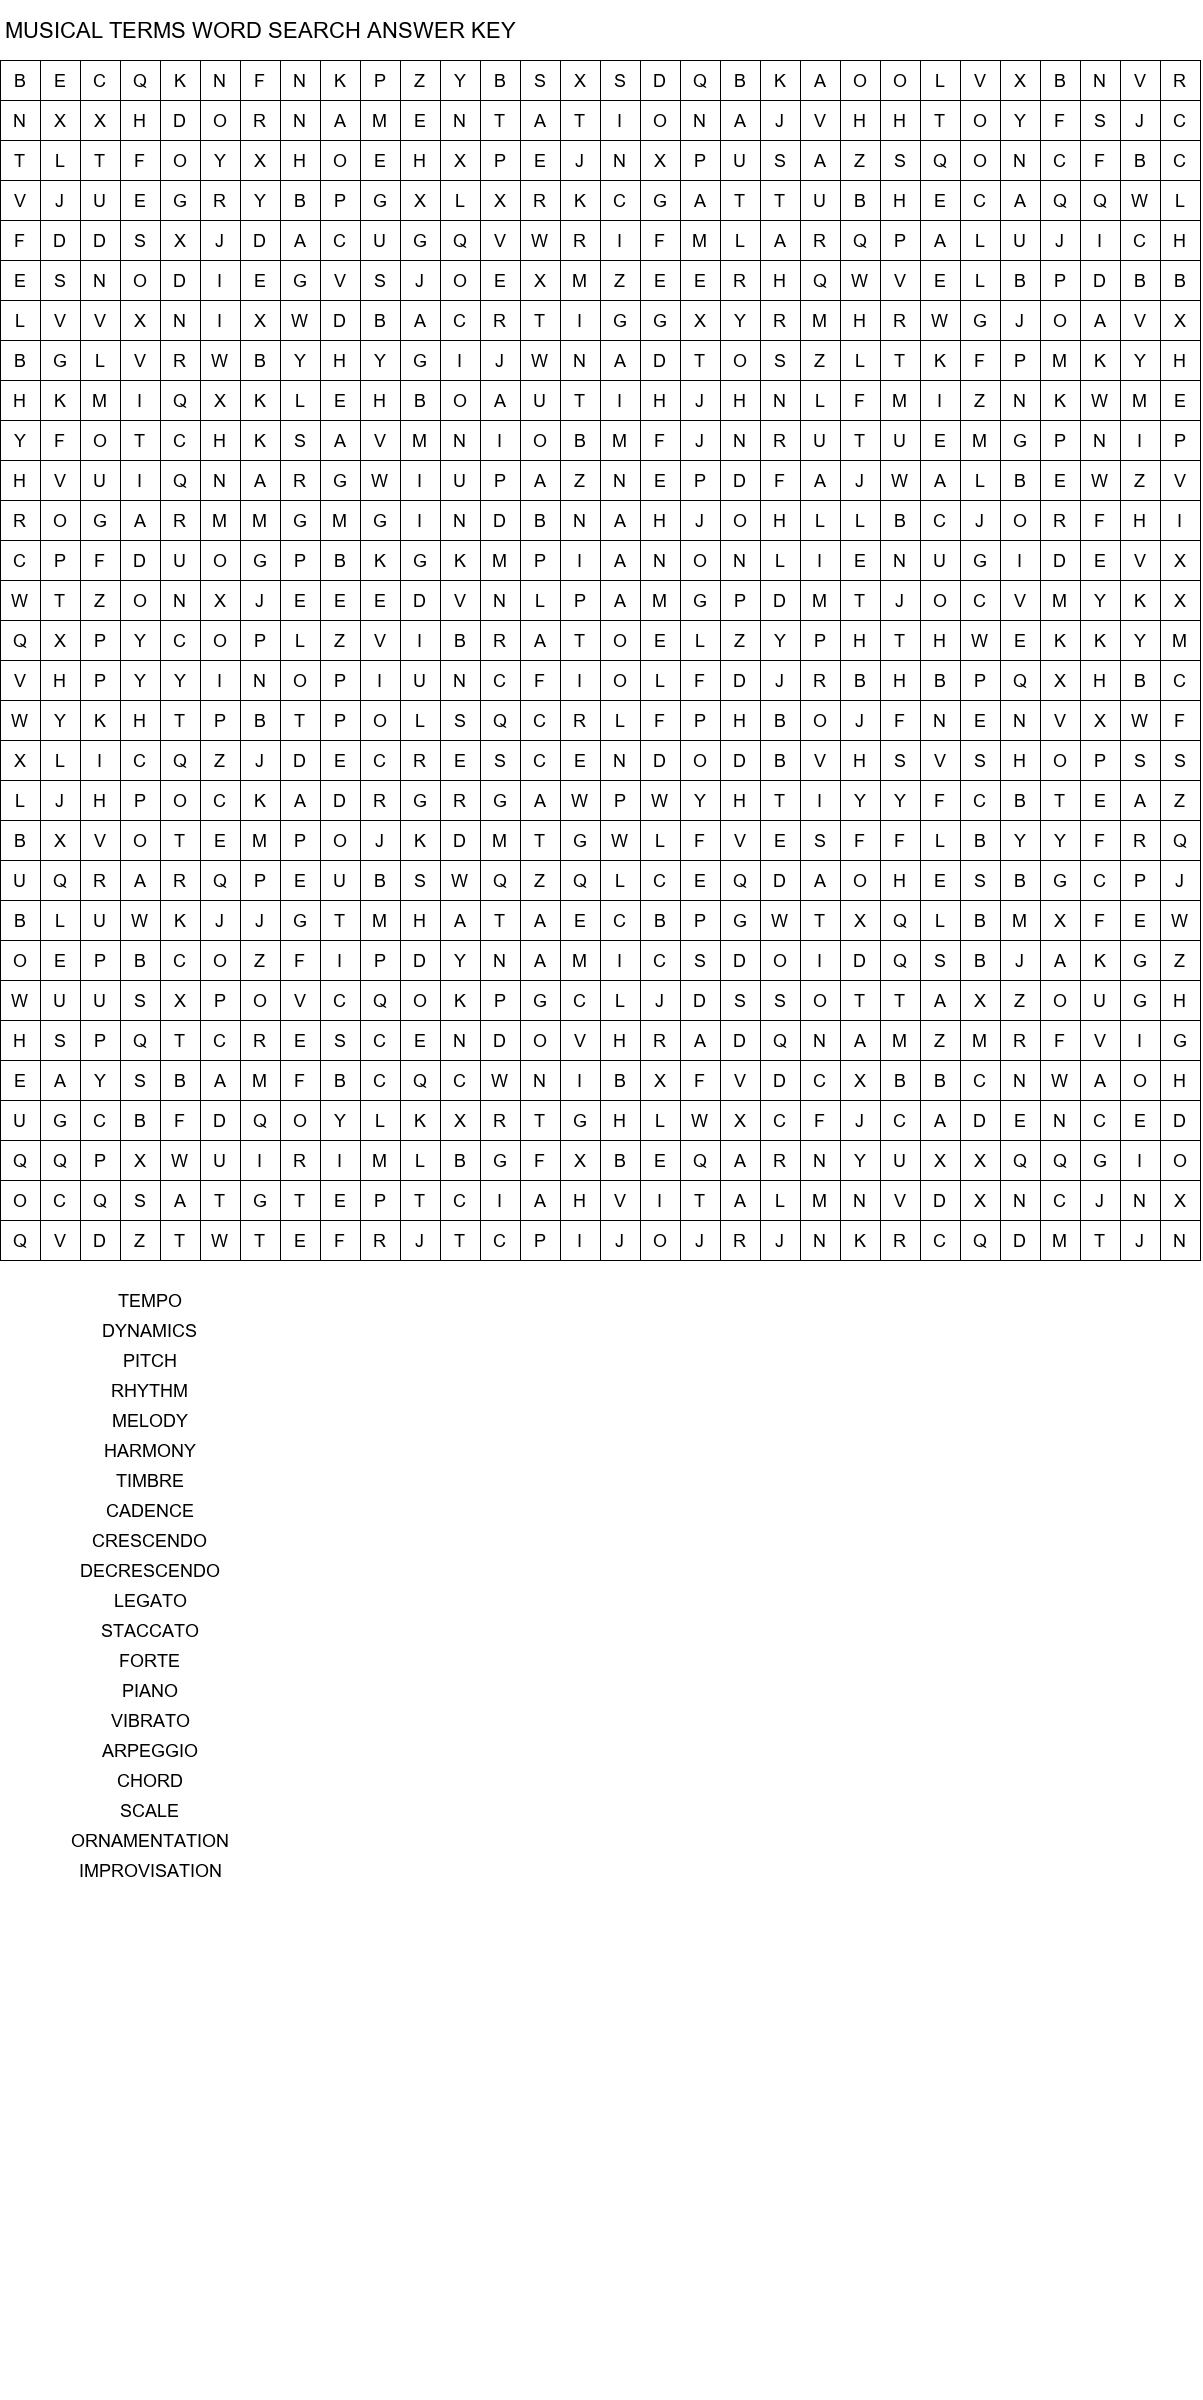 musical terms word search answer key size 30x30